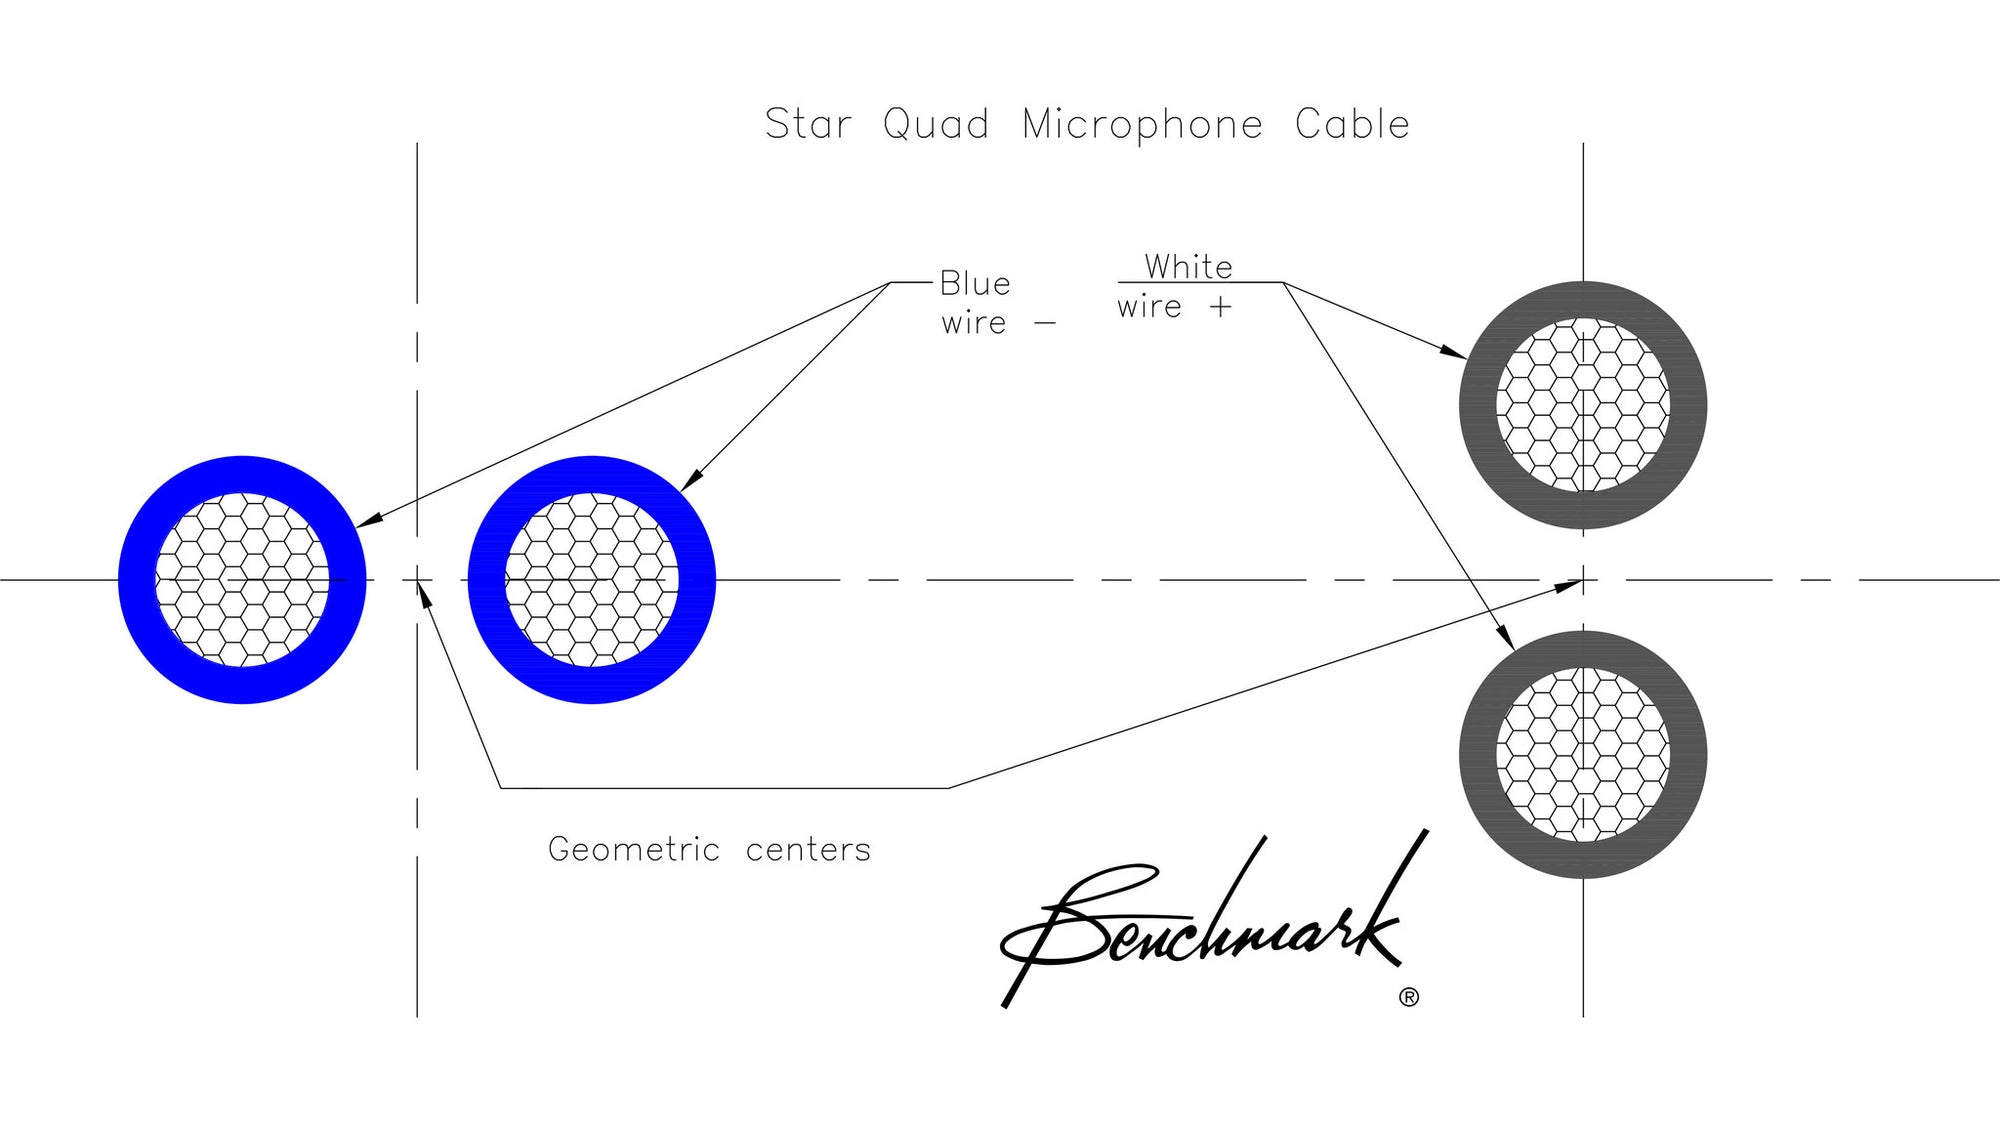 Star quad 4-wire construction. Pairs use common geometric center to achieve magnetic immunity.